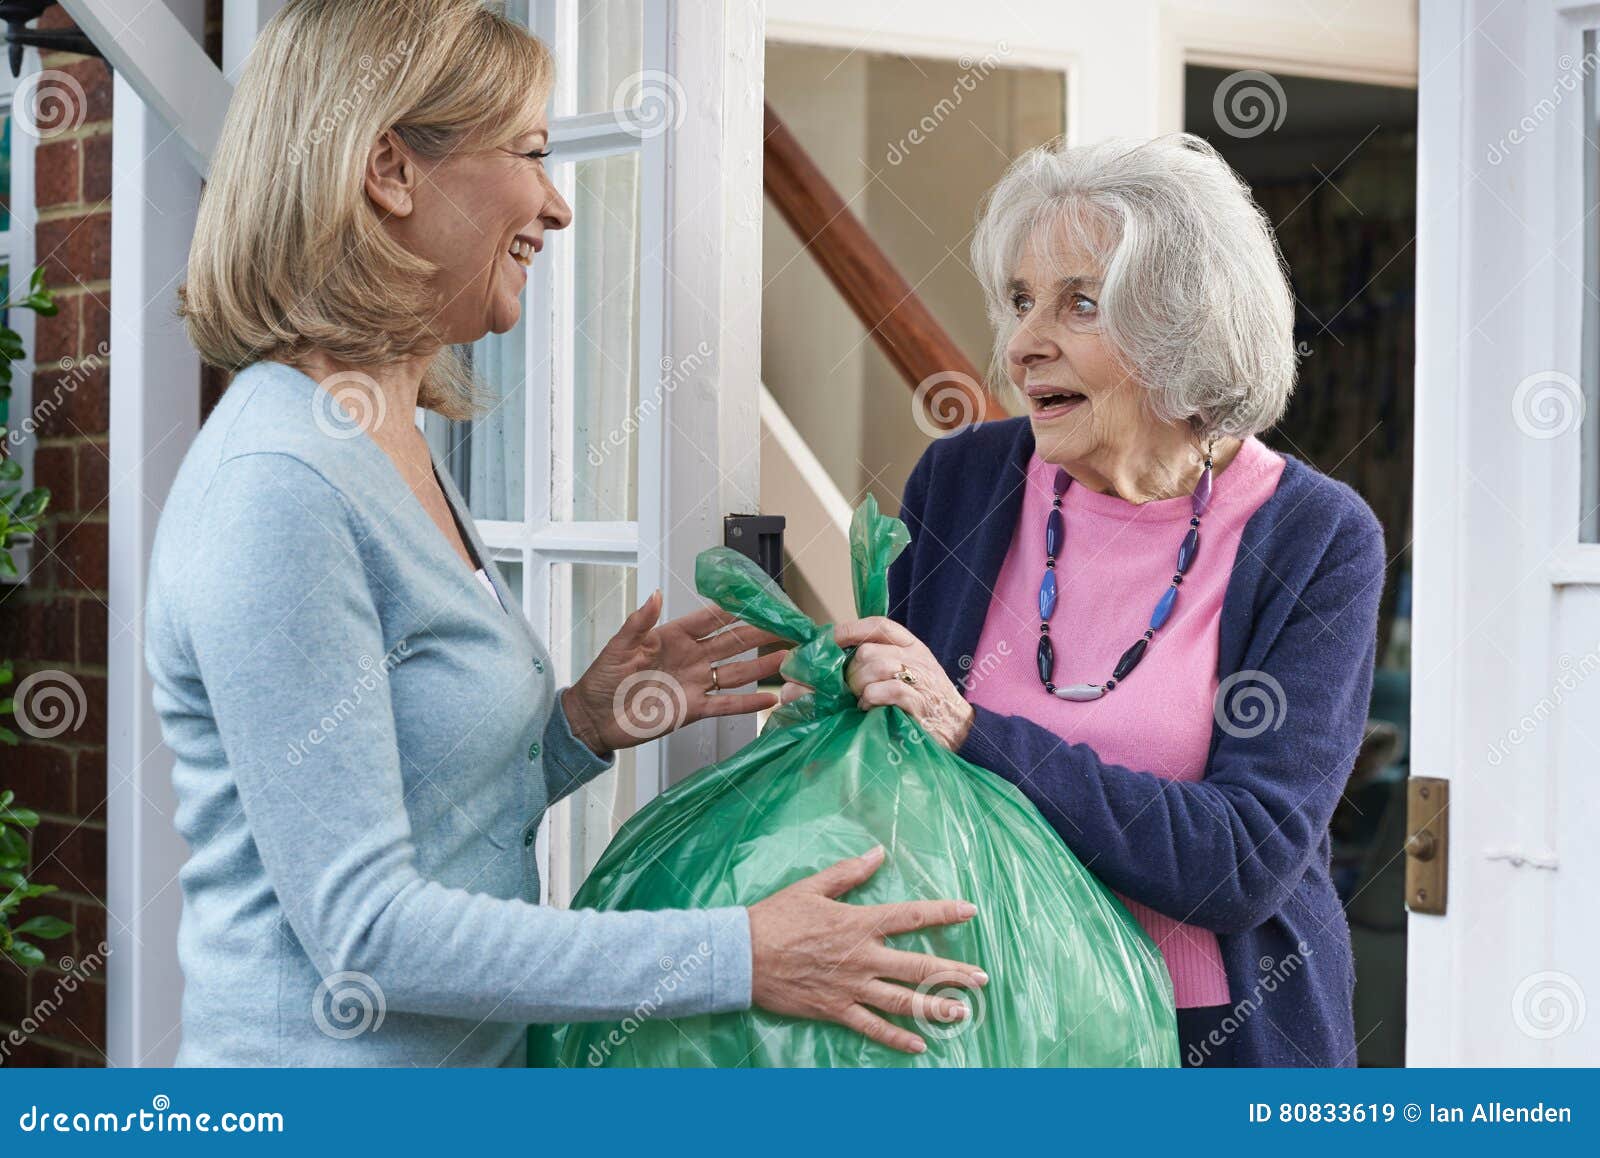 woman taking out trash for elderly neighbour